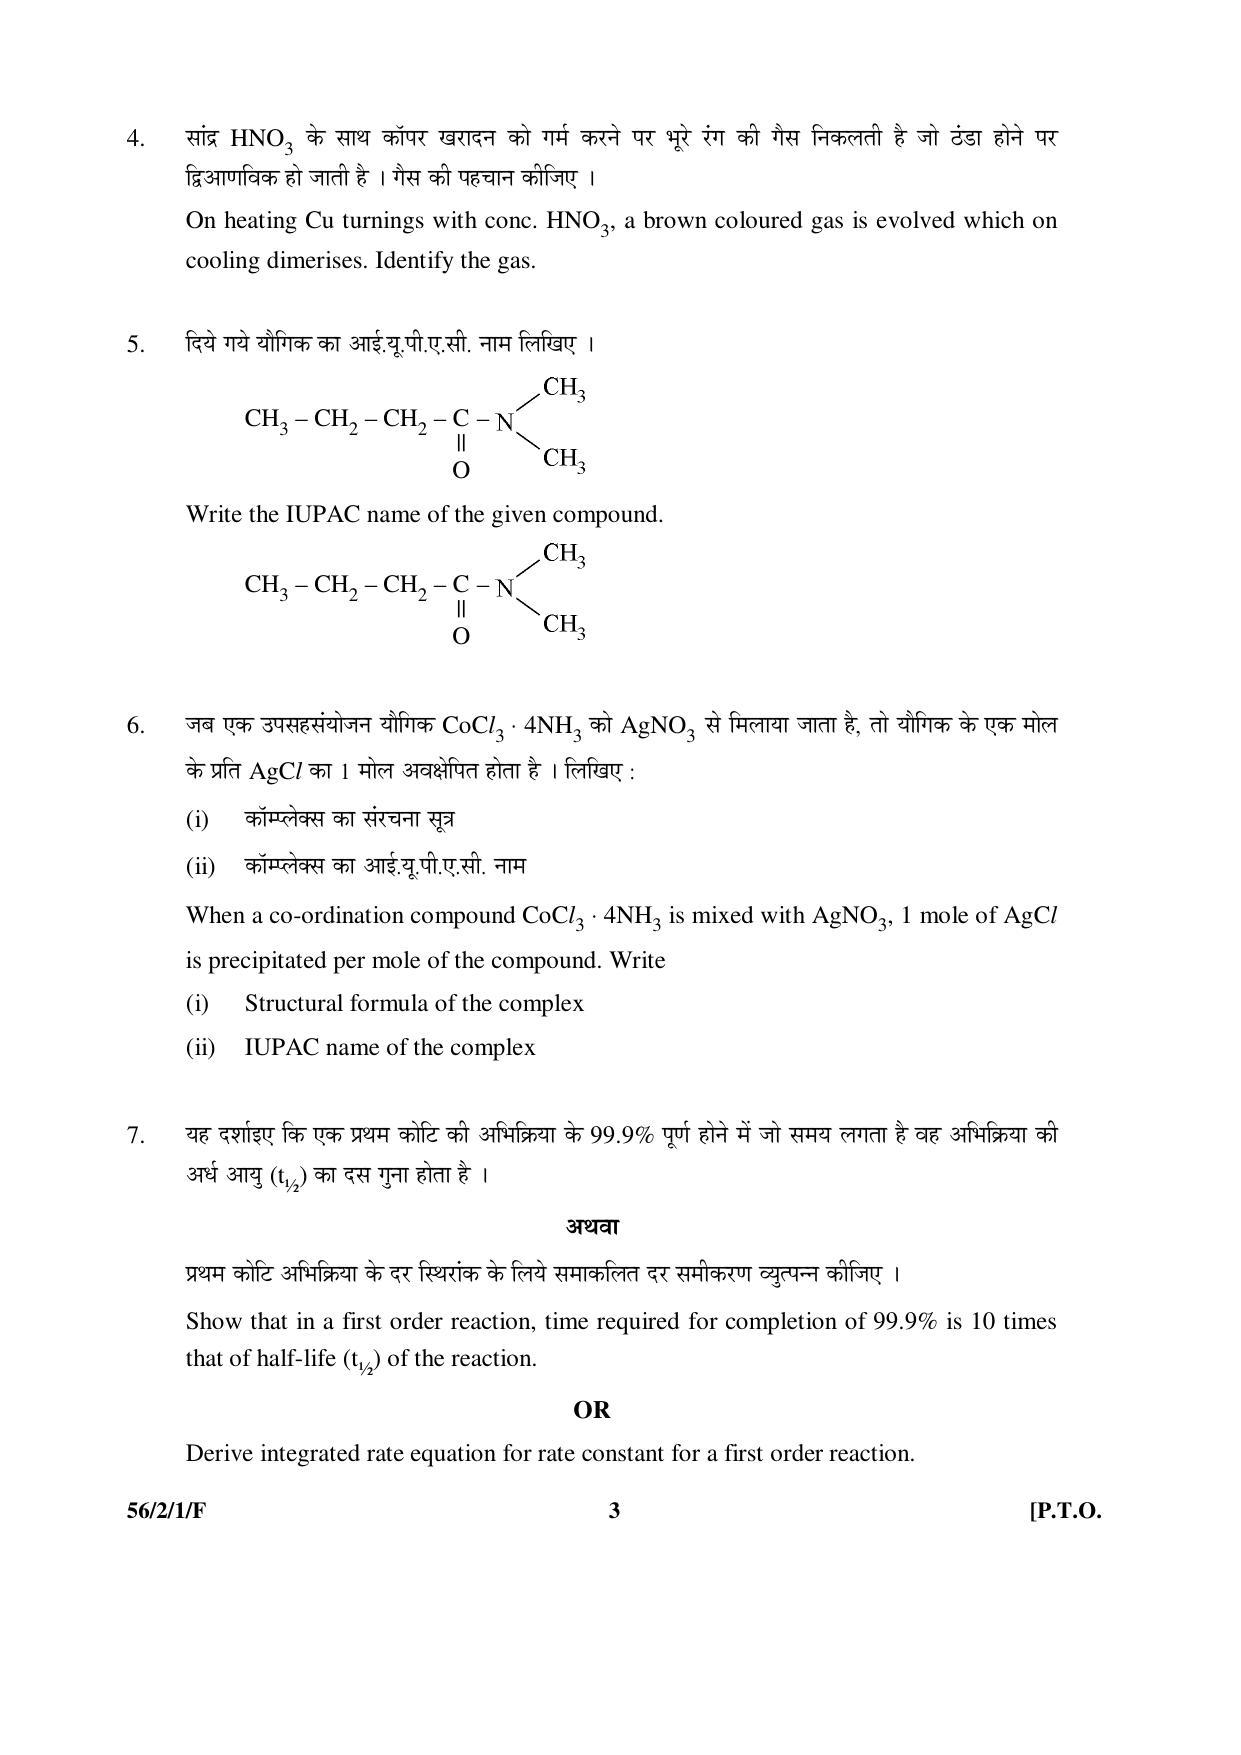 CBSE Class 12 56-2-1-F _Chemistry_ 2016 Question Paper - Page 3